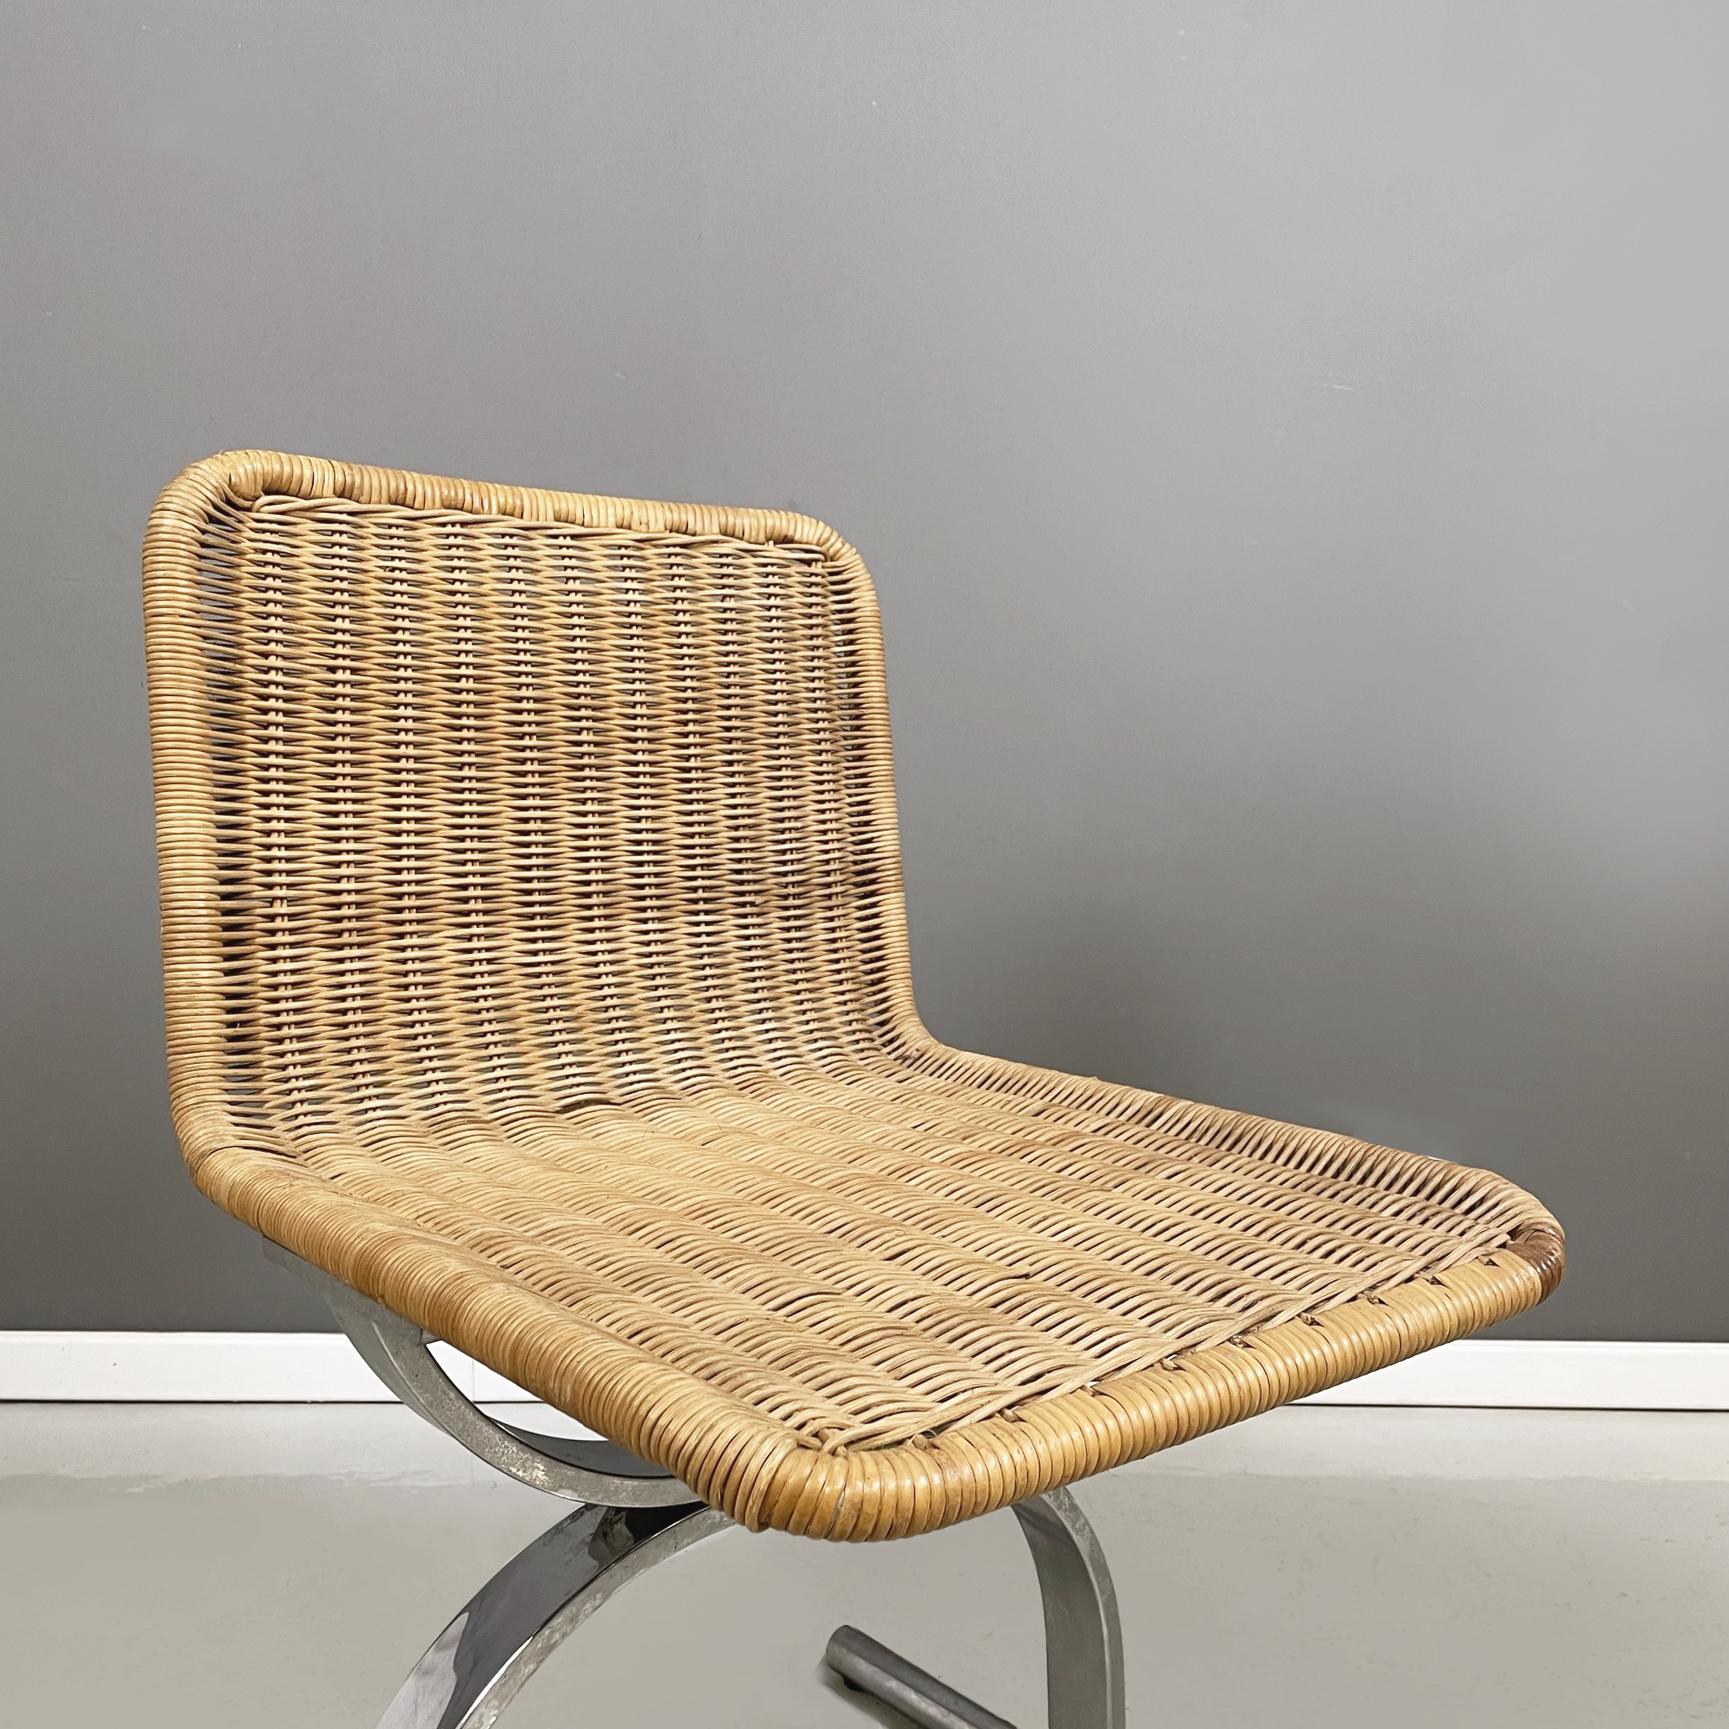 Steel Italian space age modern Chairs in straw and steel, 1970s For Sale